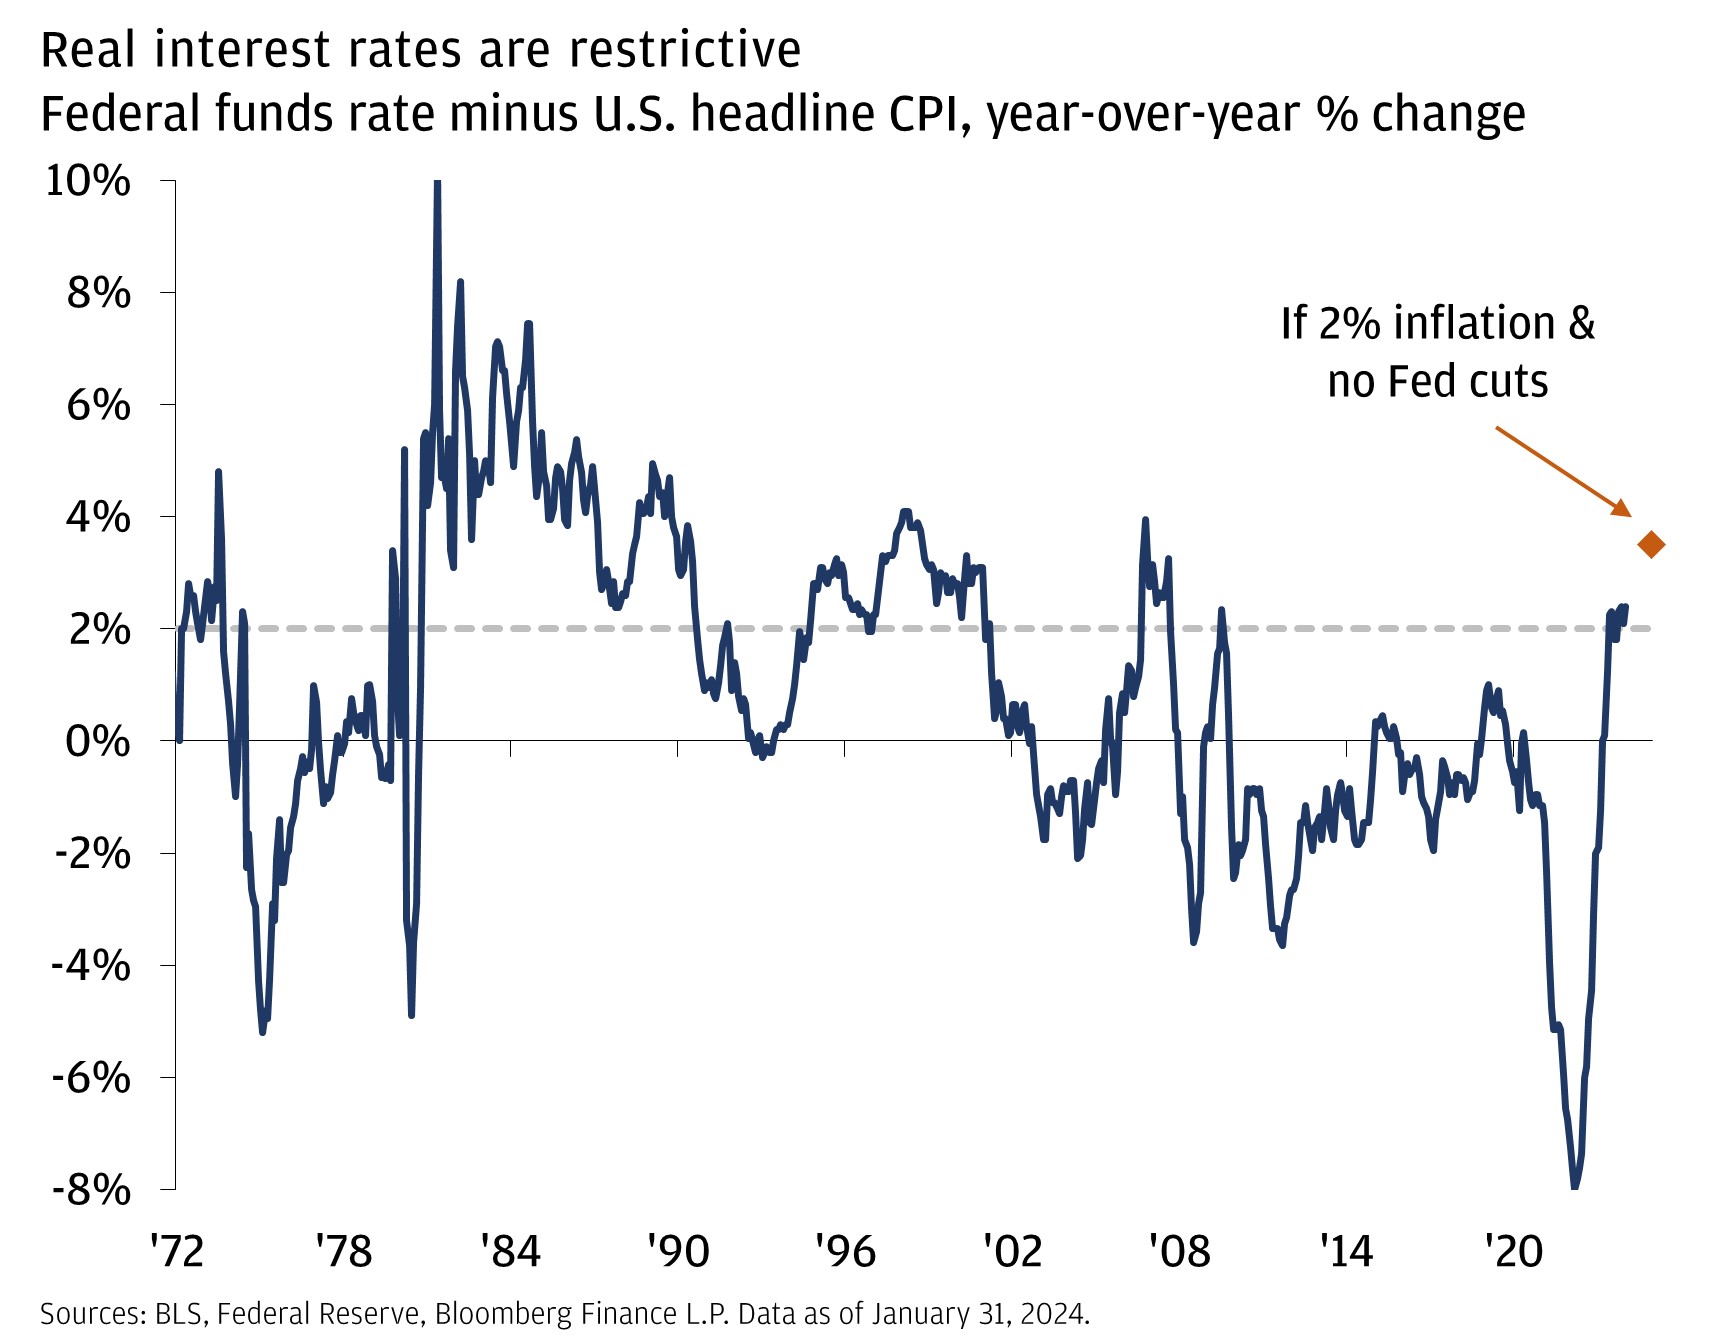 Real interest rates are restrictive